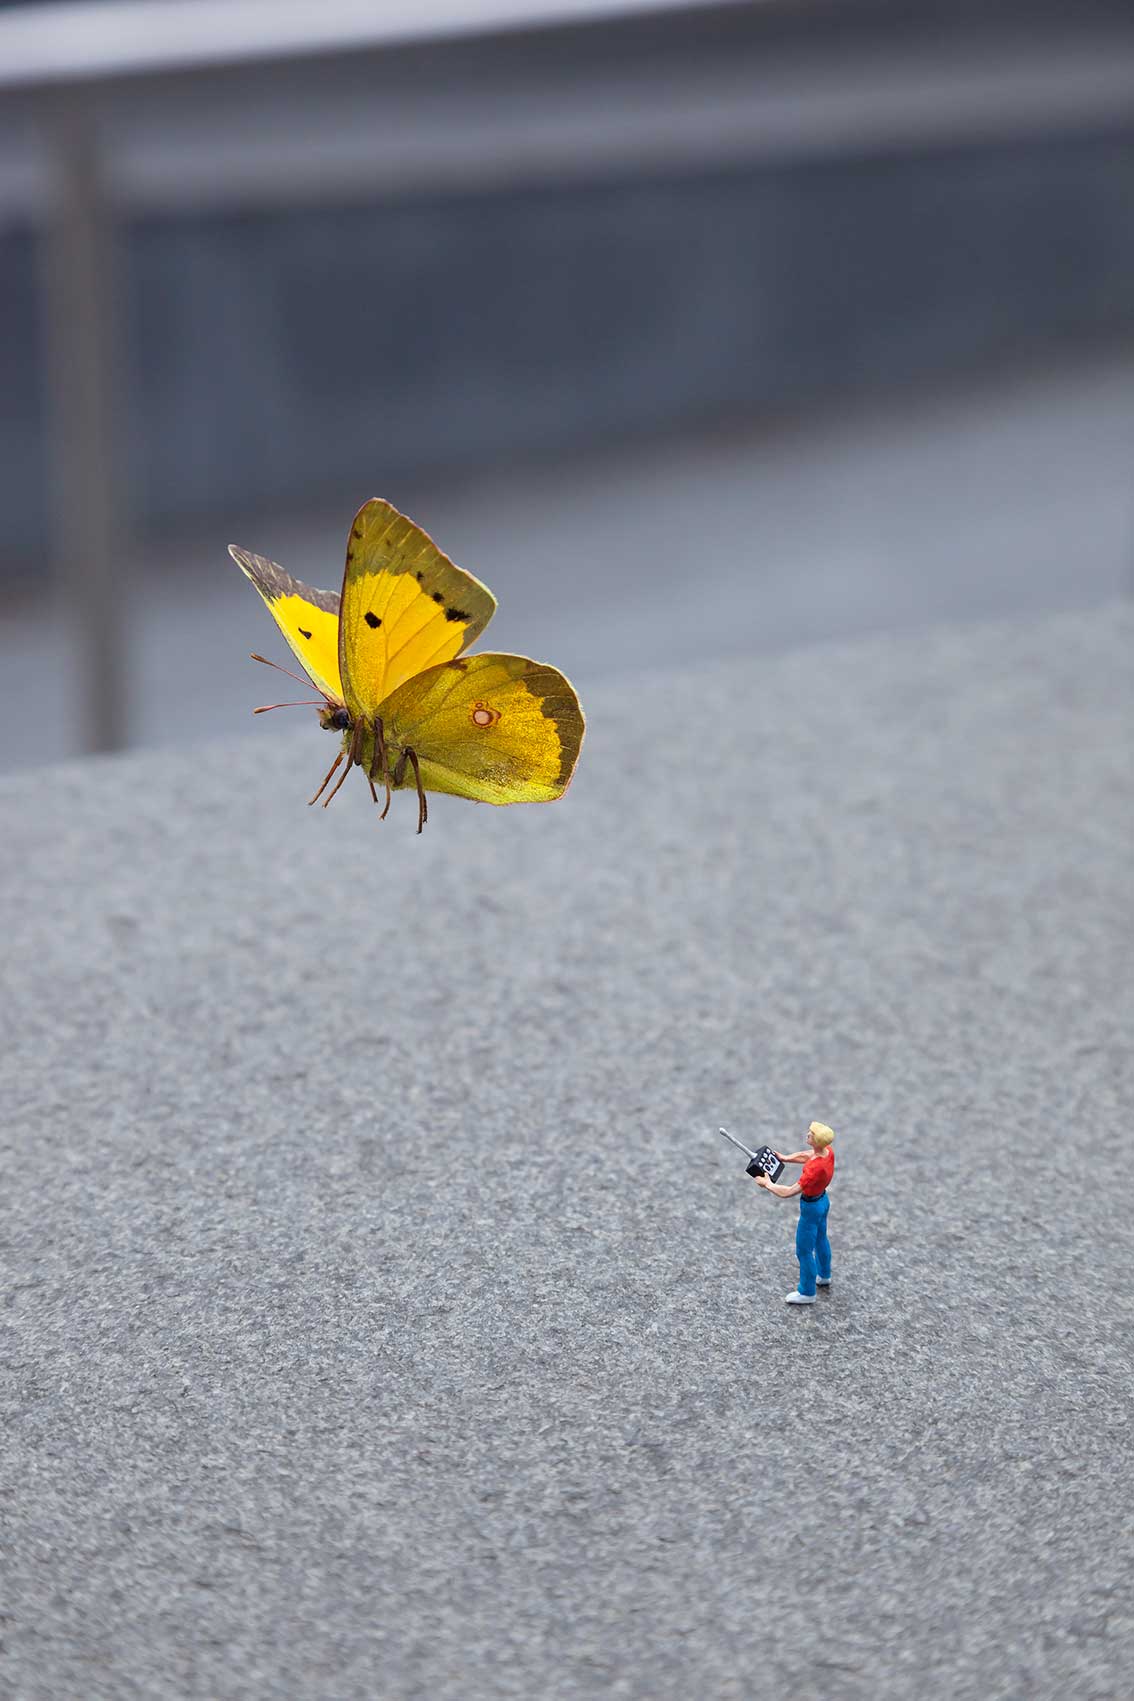 Slinkachu About the Cover